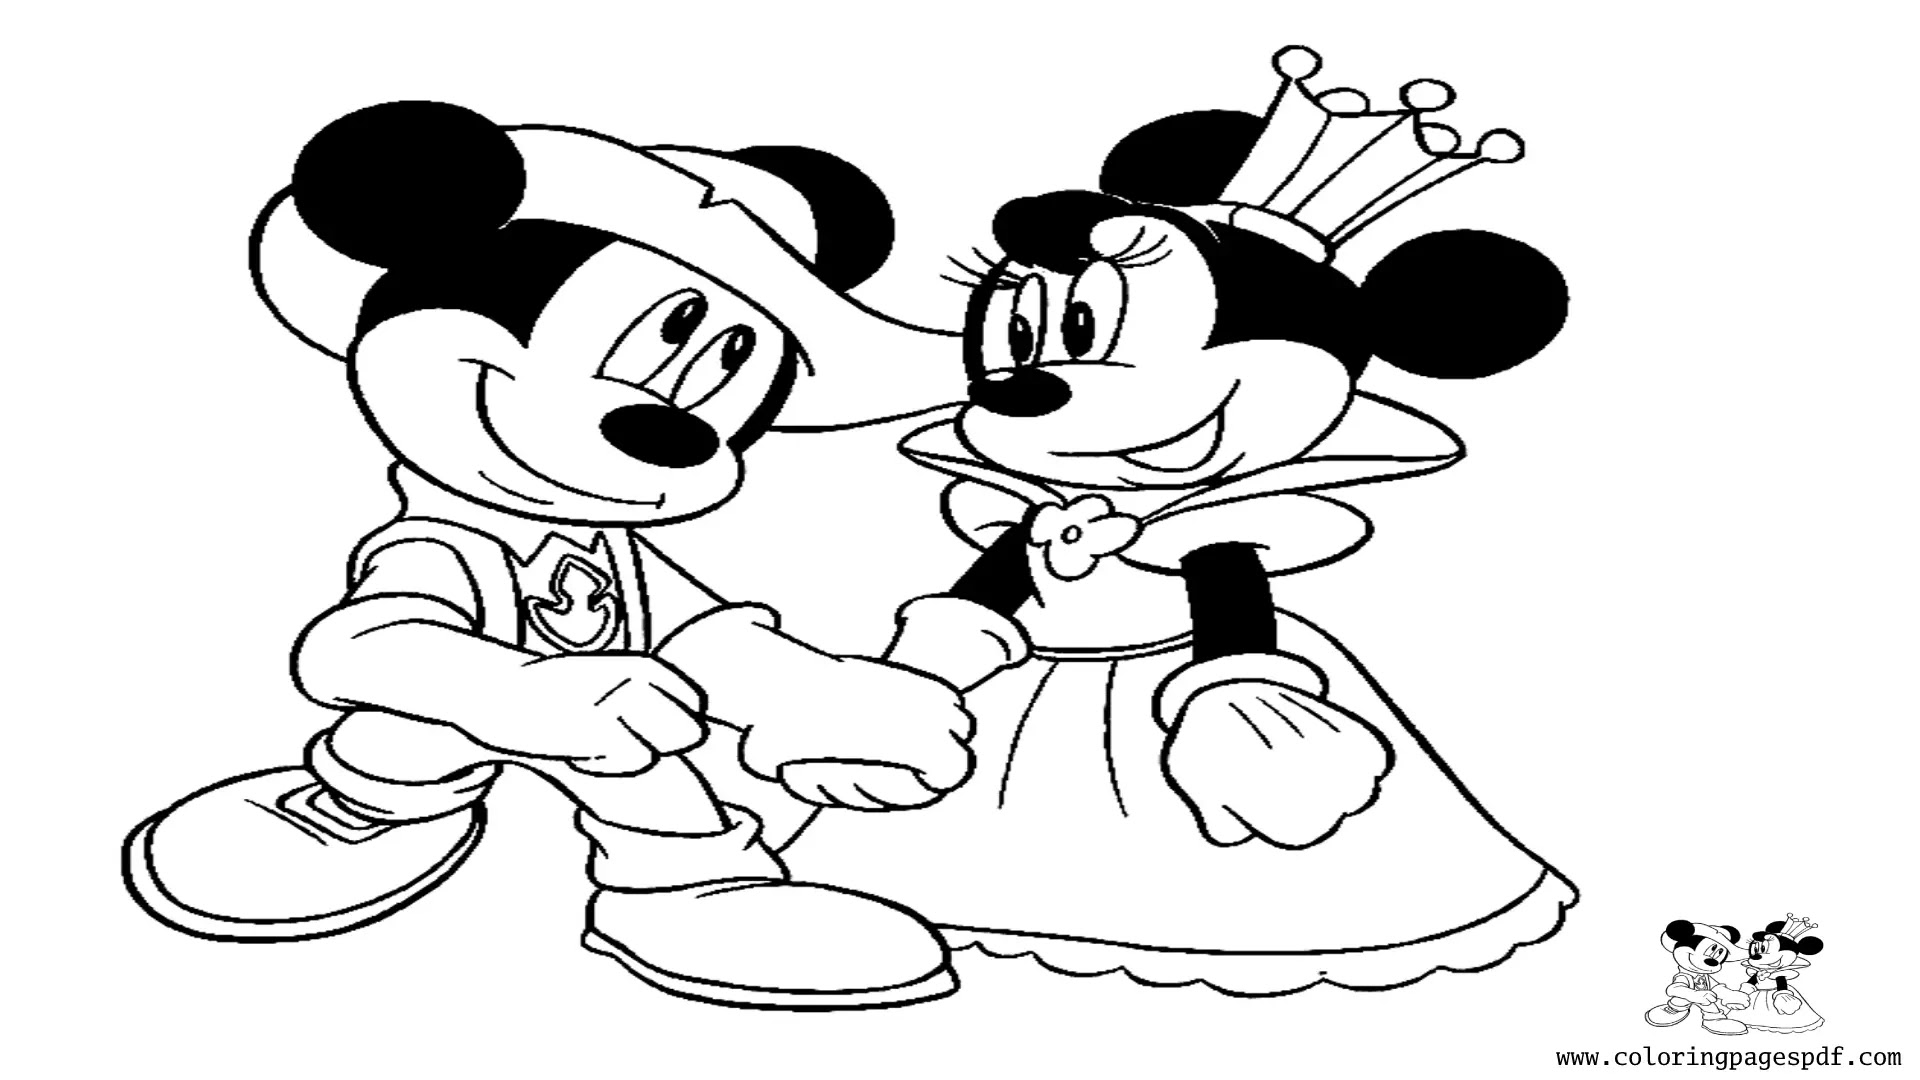 Coloring Page Of Mickey Mouse and Princess Minnie